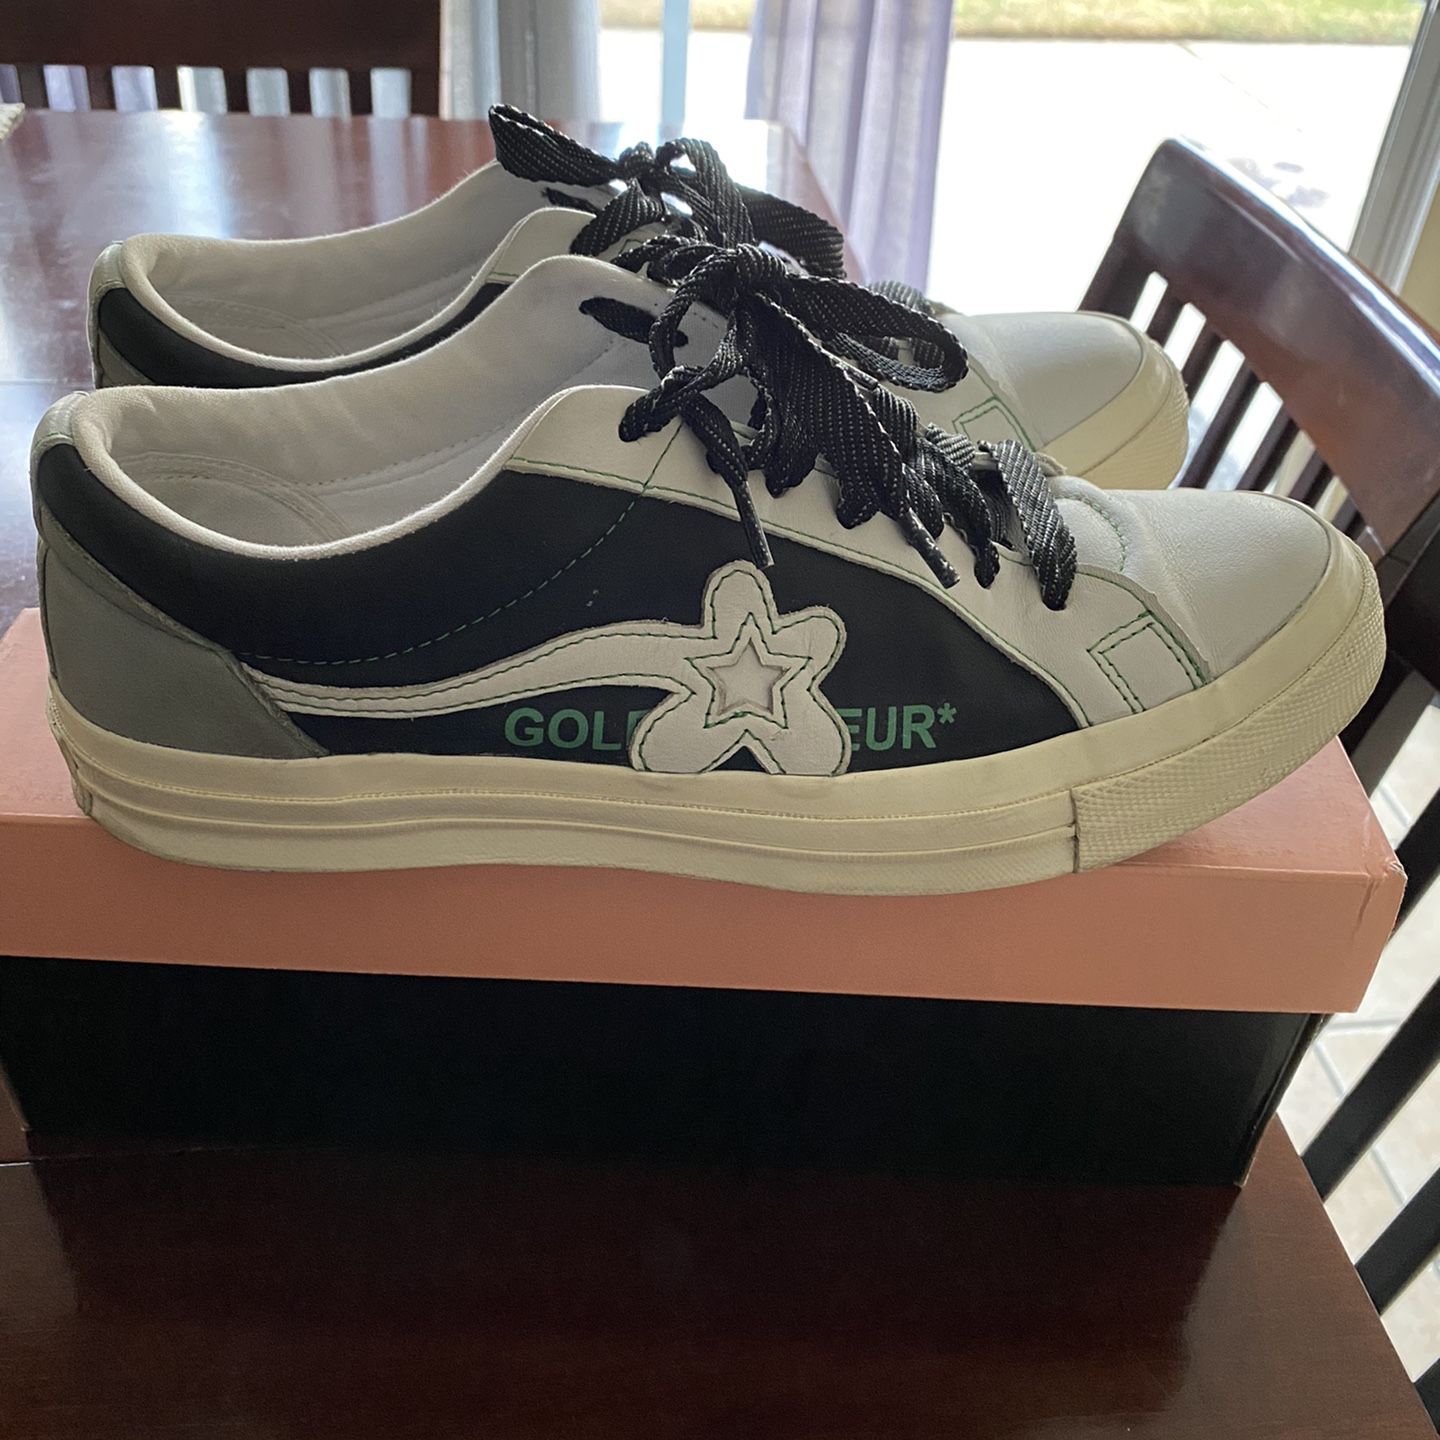 Converse One Star Golf Le Industrial Pack Grey Size 9 for Sale in Lancaster, CA - OfferUp